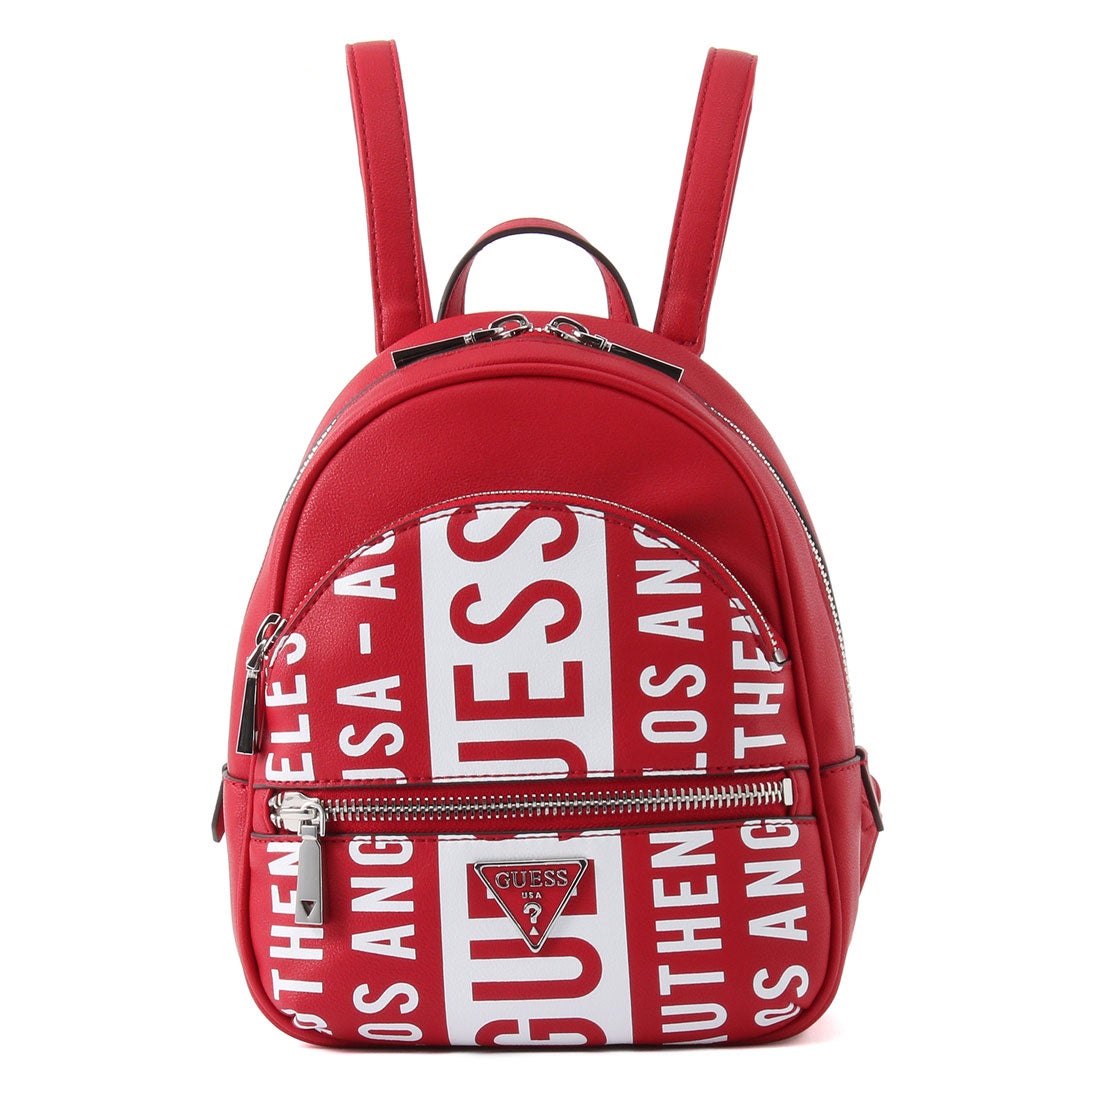 GUESS Backpack Red リュック☆